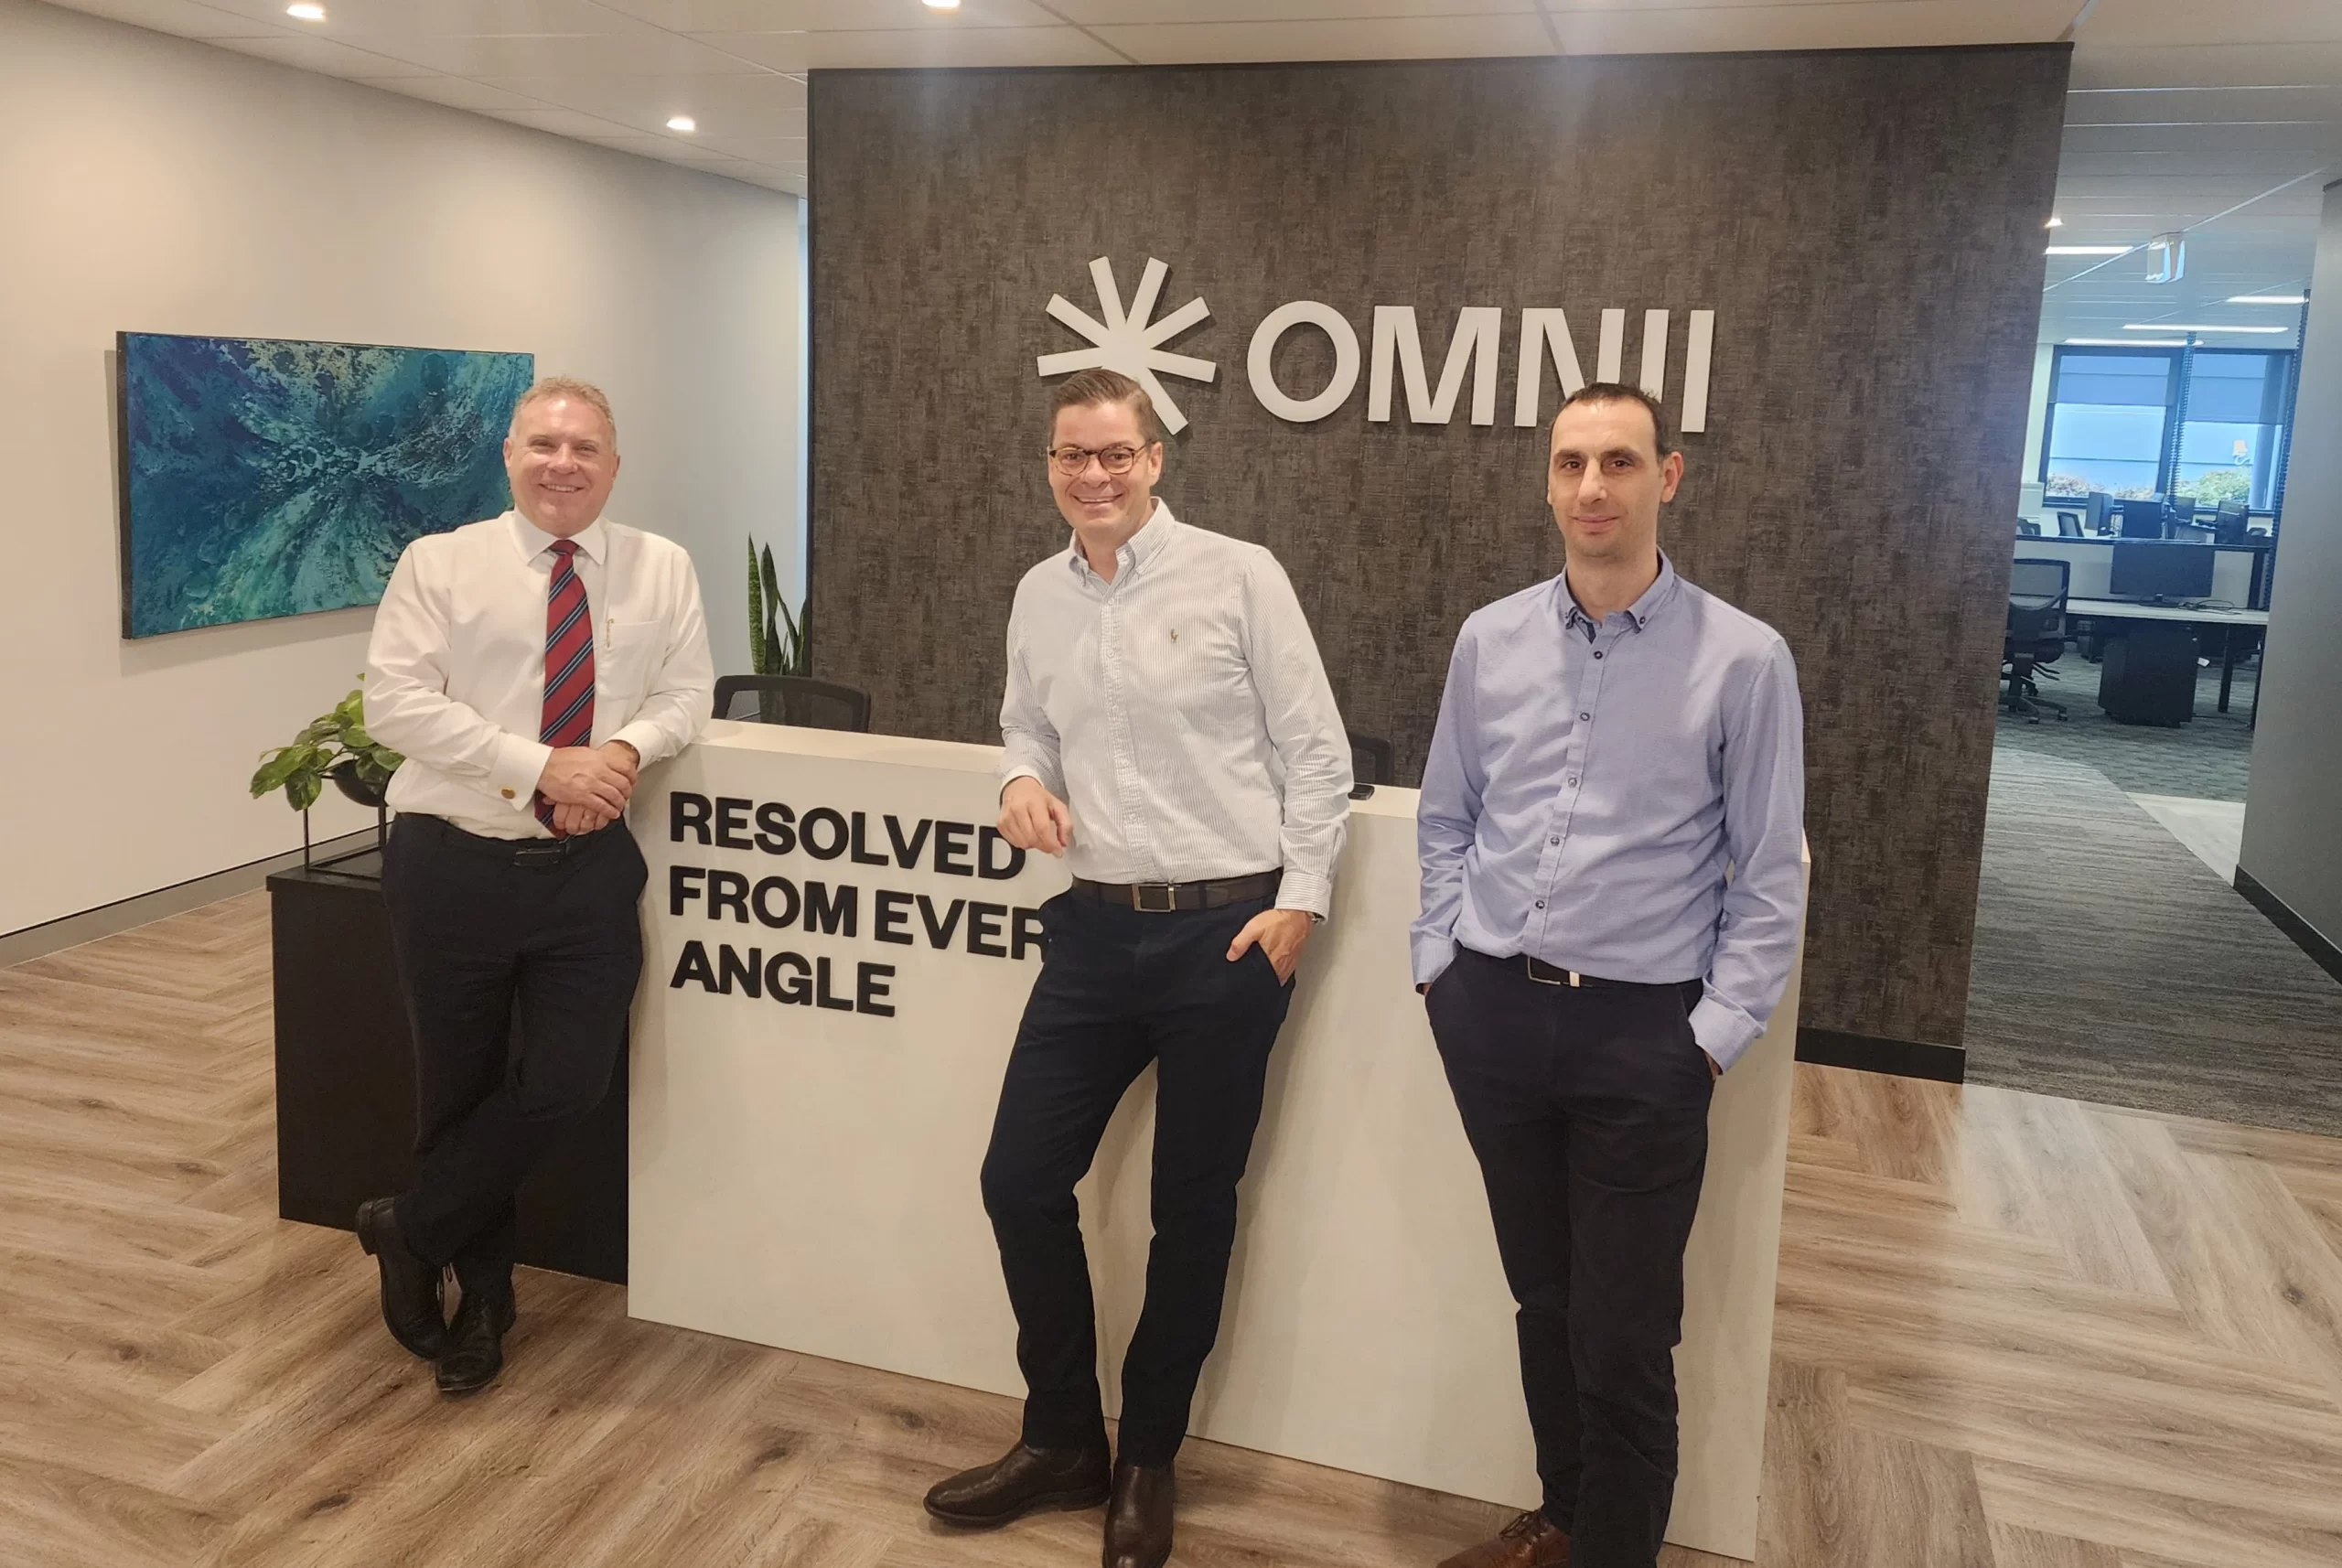 Peter Glodic with Richard Austin, Omnii's New CEO, and Marcello Arbaci